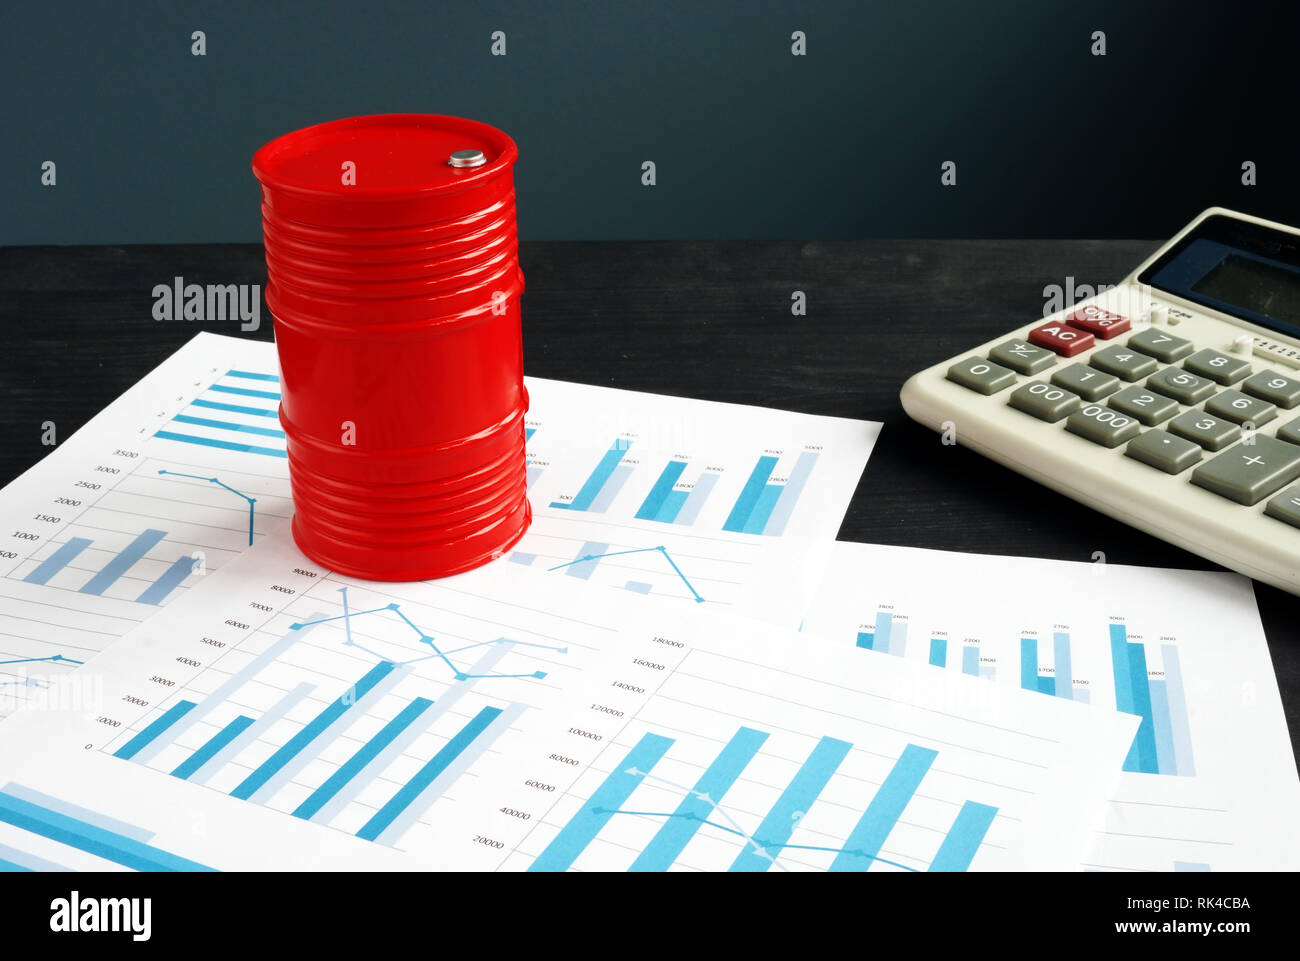 Oil trading concept. Barrel and exchange data with financial reports. Stock Photo